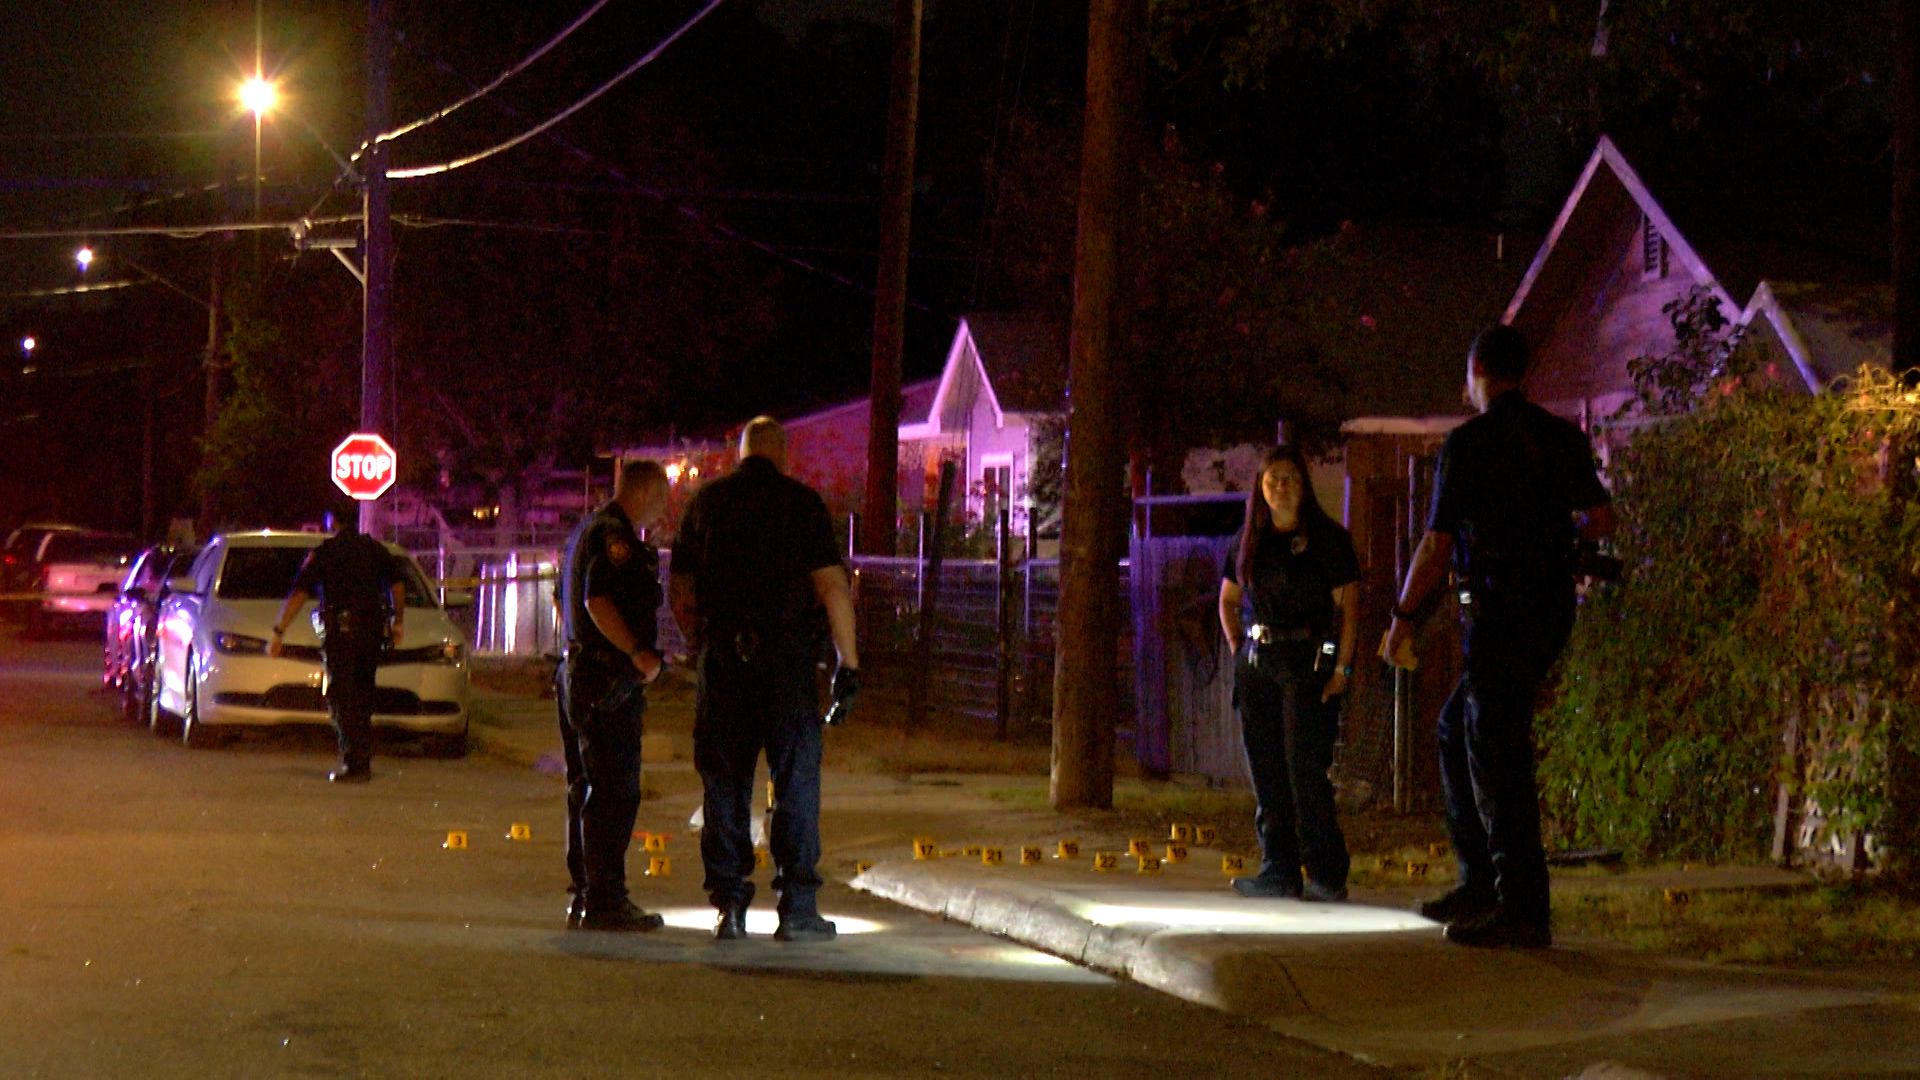 Man hospitalized after being shot in face on city’s West Side, police say